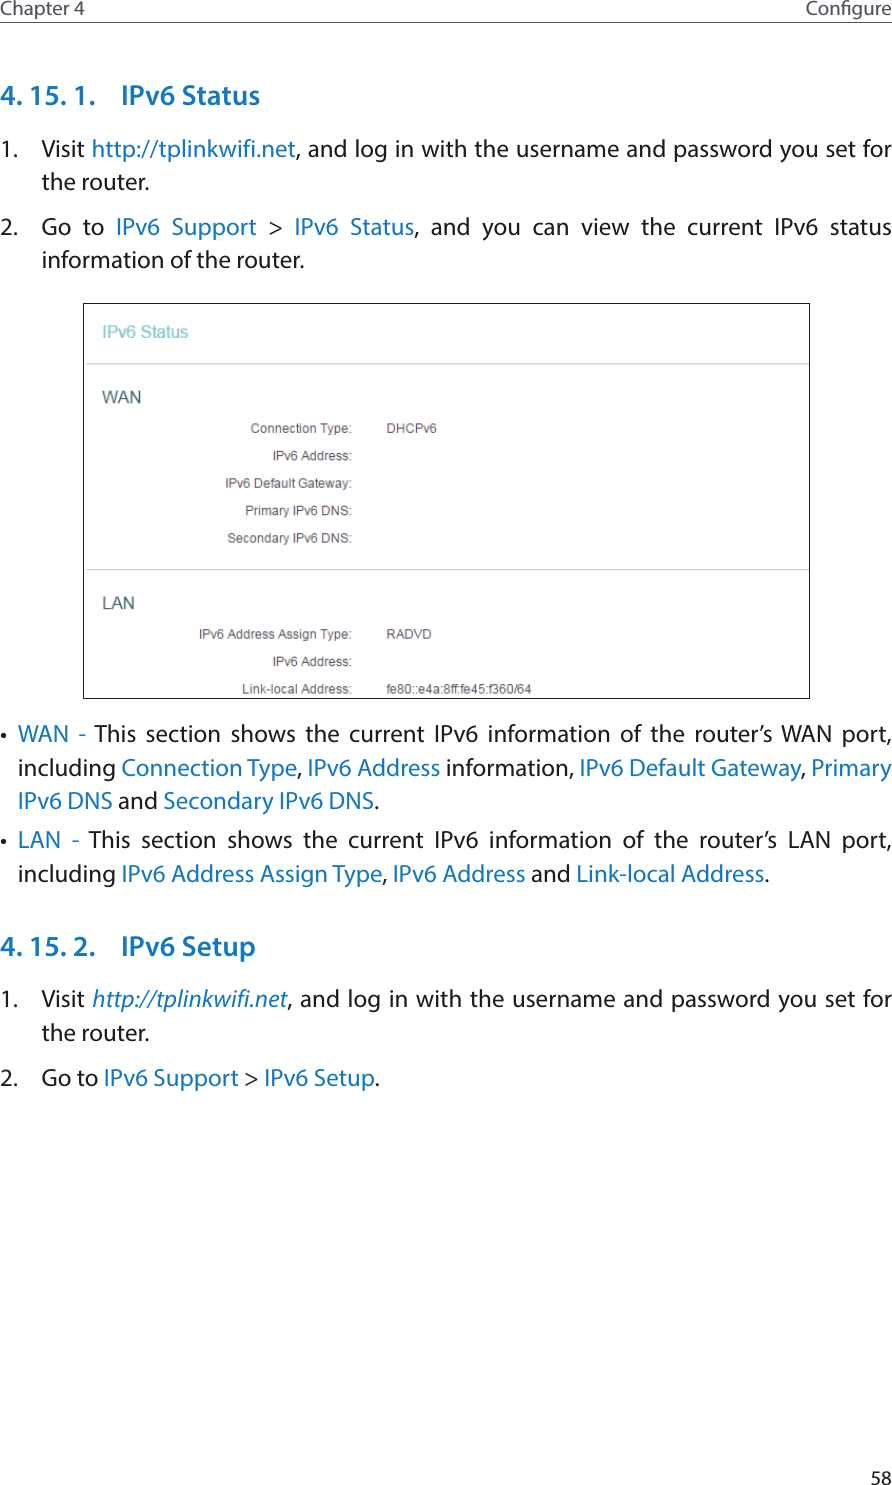 58Chapter 4 Congure4. 15. 1.  IPv6 Status1.  Visit http://tplinkwifi.net, and log in with the username and password you set for the router.2.  Go to IPv6 Support &gt; IPv6 Status, and you can view the current IPv6 status information of the router.•  WAN - This section shows the current IPv6 information of the router’s WAN port, including Connection Type, IPv6 Address information, IPv6 Default Gateway, Primary IPv6 DNS and Secondary IPv6 DNS.•  LAN - This section shows the current IPv6 information of the router’s LAN port, including IPv6 Address Assign Type, IPv6 Address and Link-local Address.4. 15. 2.  IPv6 Setup1.  Visit http://tplinkwifi.net, and log in with the username and password you set for the router.2.  Go to IPv6 Support &gt; IPv6 Setup.